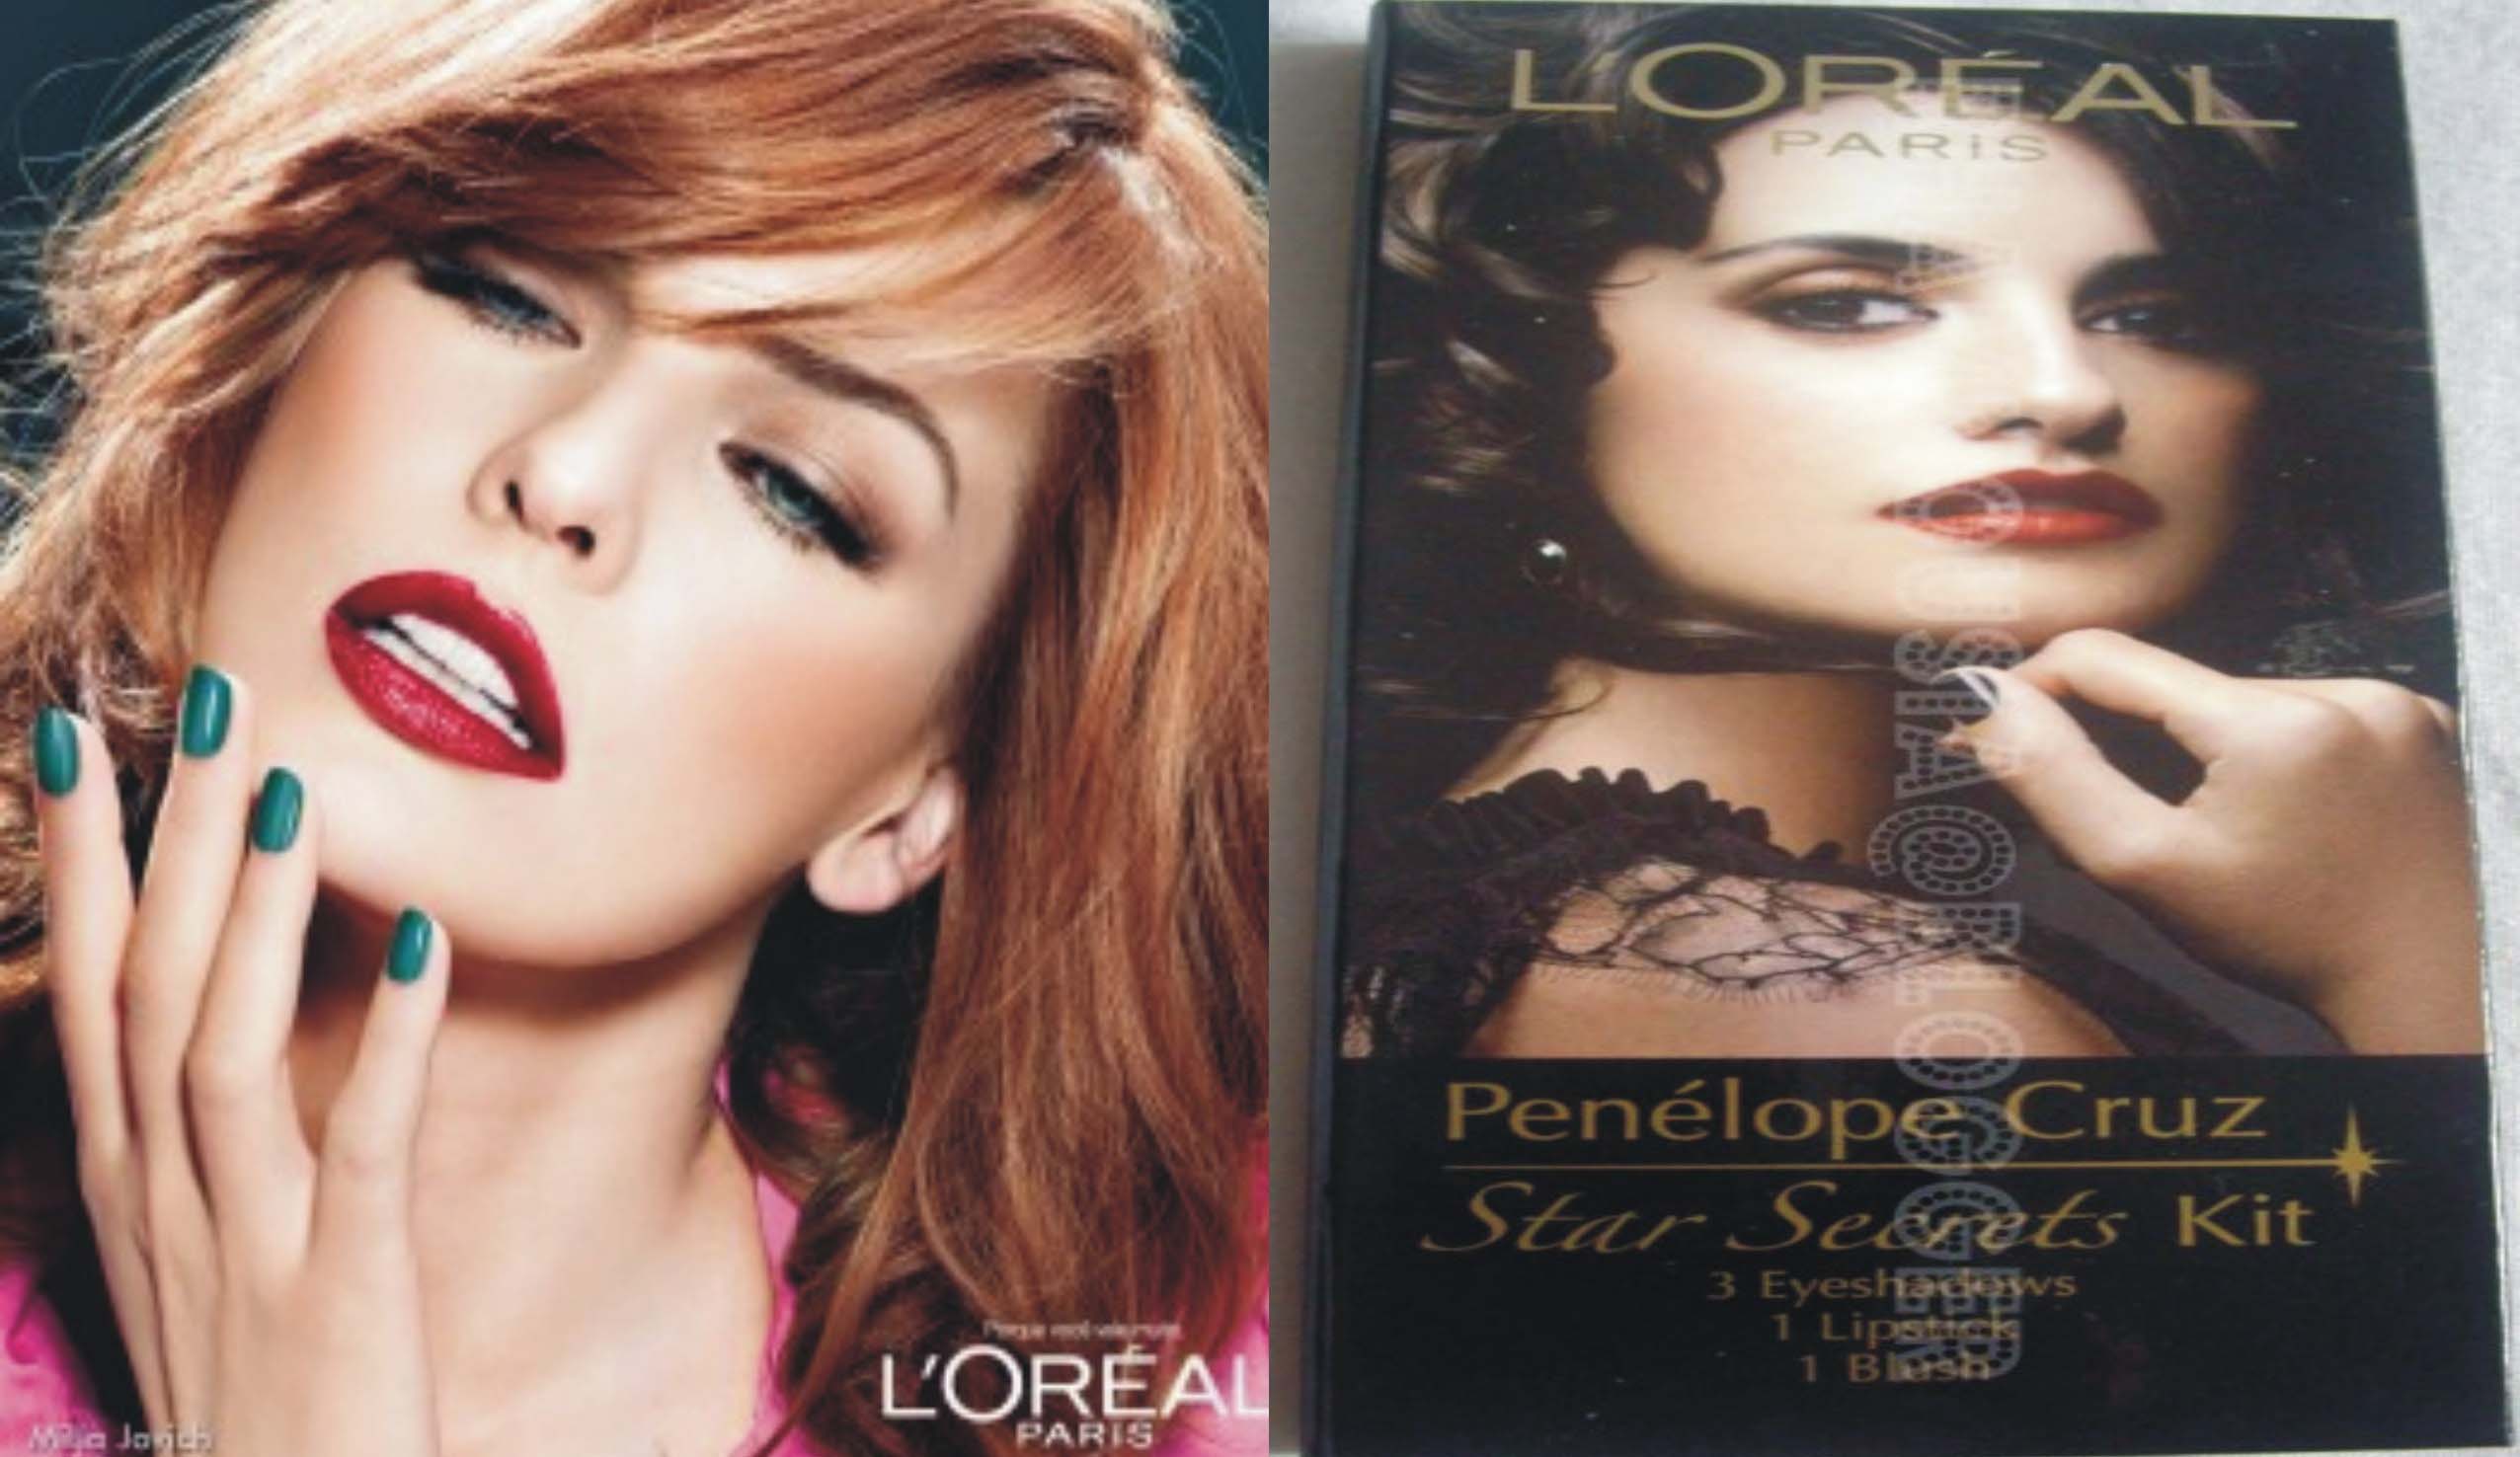 L’Oreal Star Secrets Make Up Kit Best For House Wives And Working Ladies